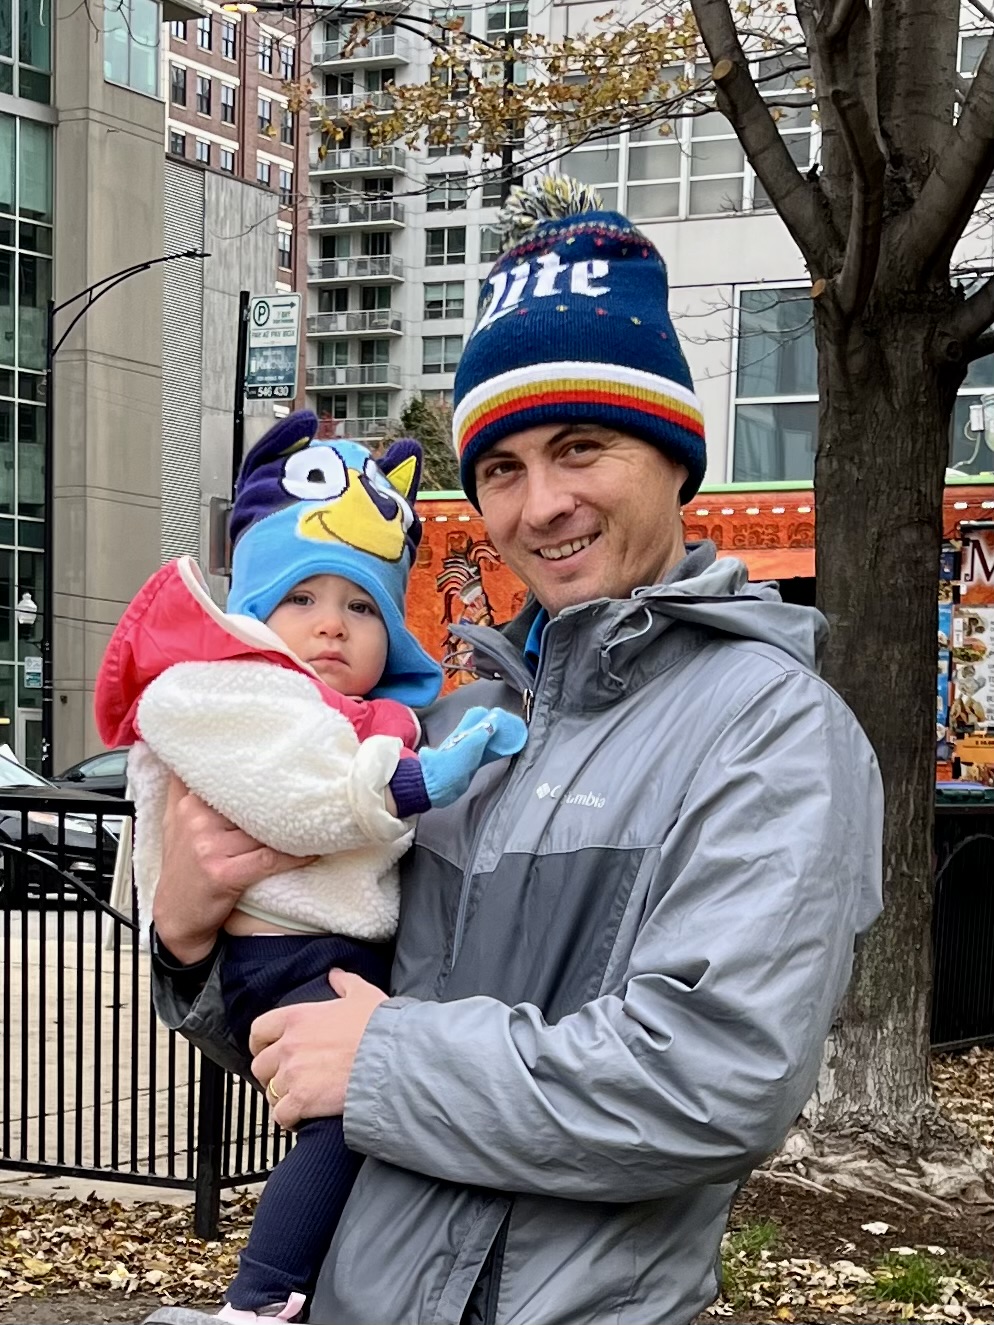 Dad with baby in blue hat